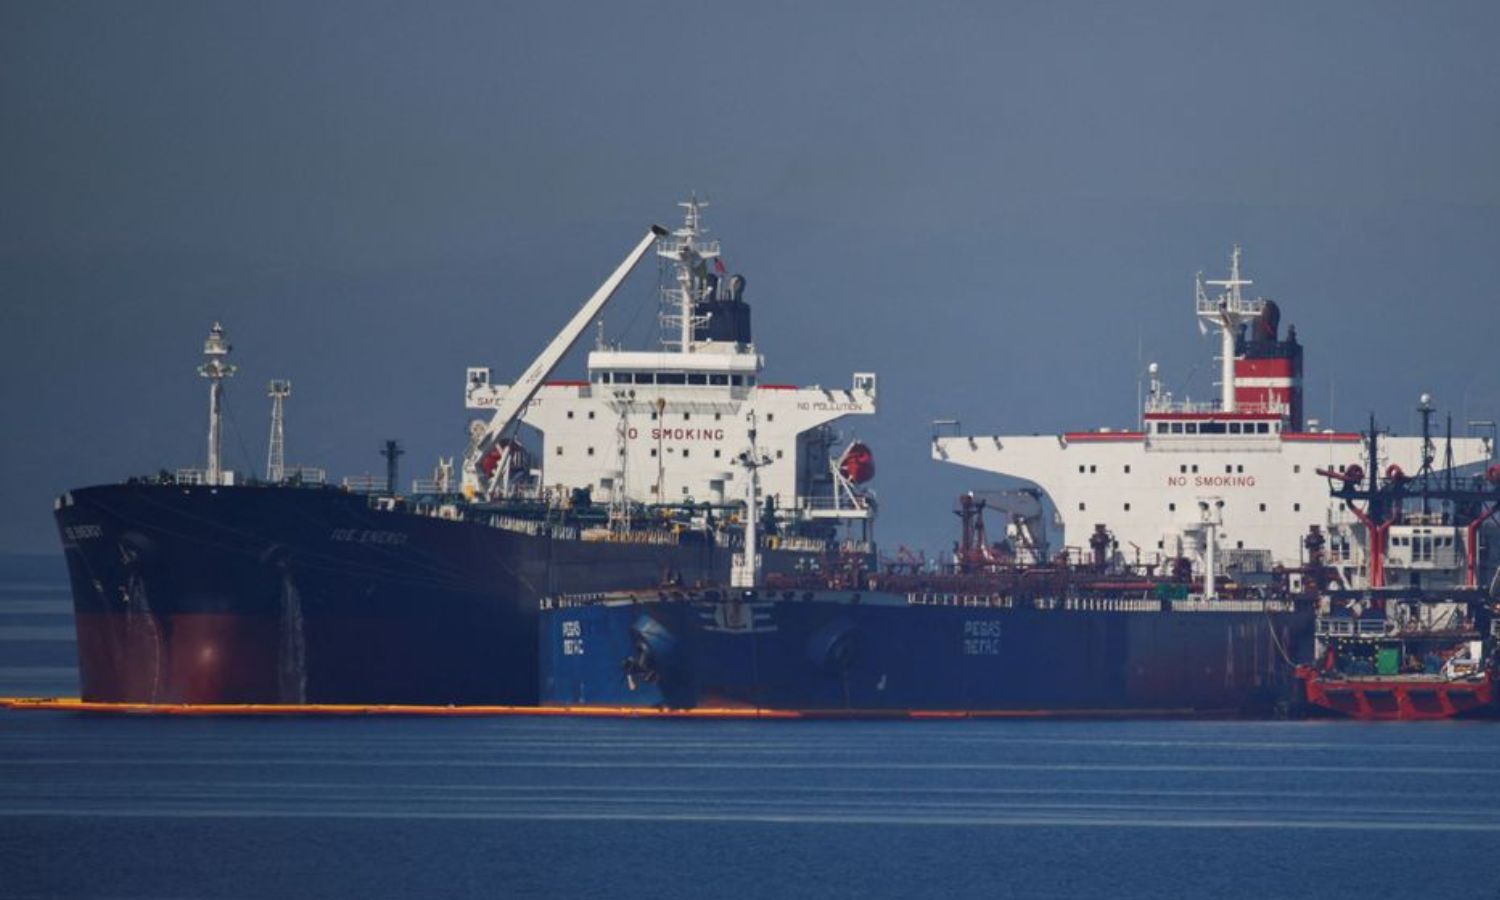 The Liberian-flagged Ice Energy oil tanker transports crude oil from the Iranian-flagged oil tanker Lana (formerly Pegas) off Karystos Beach in Greece - 26 May 2022 (Reuters)